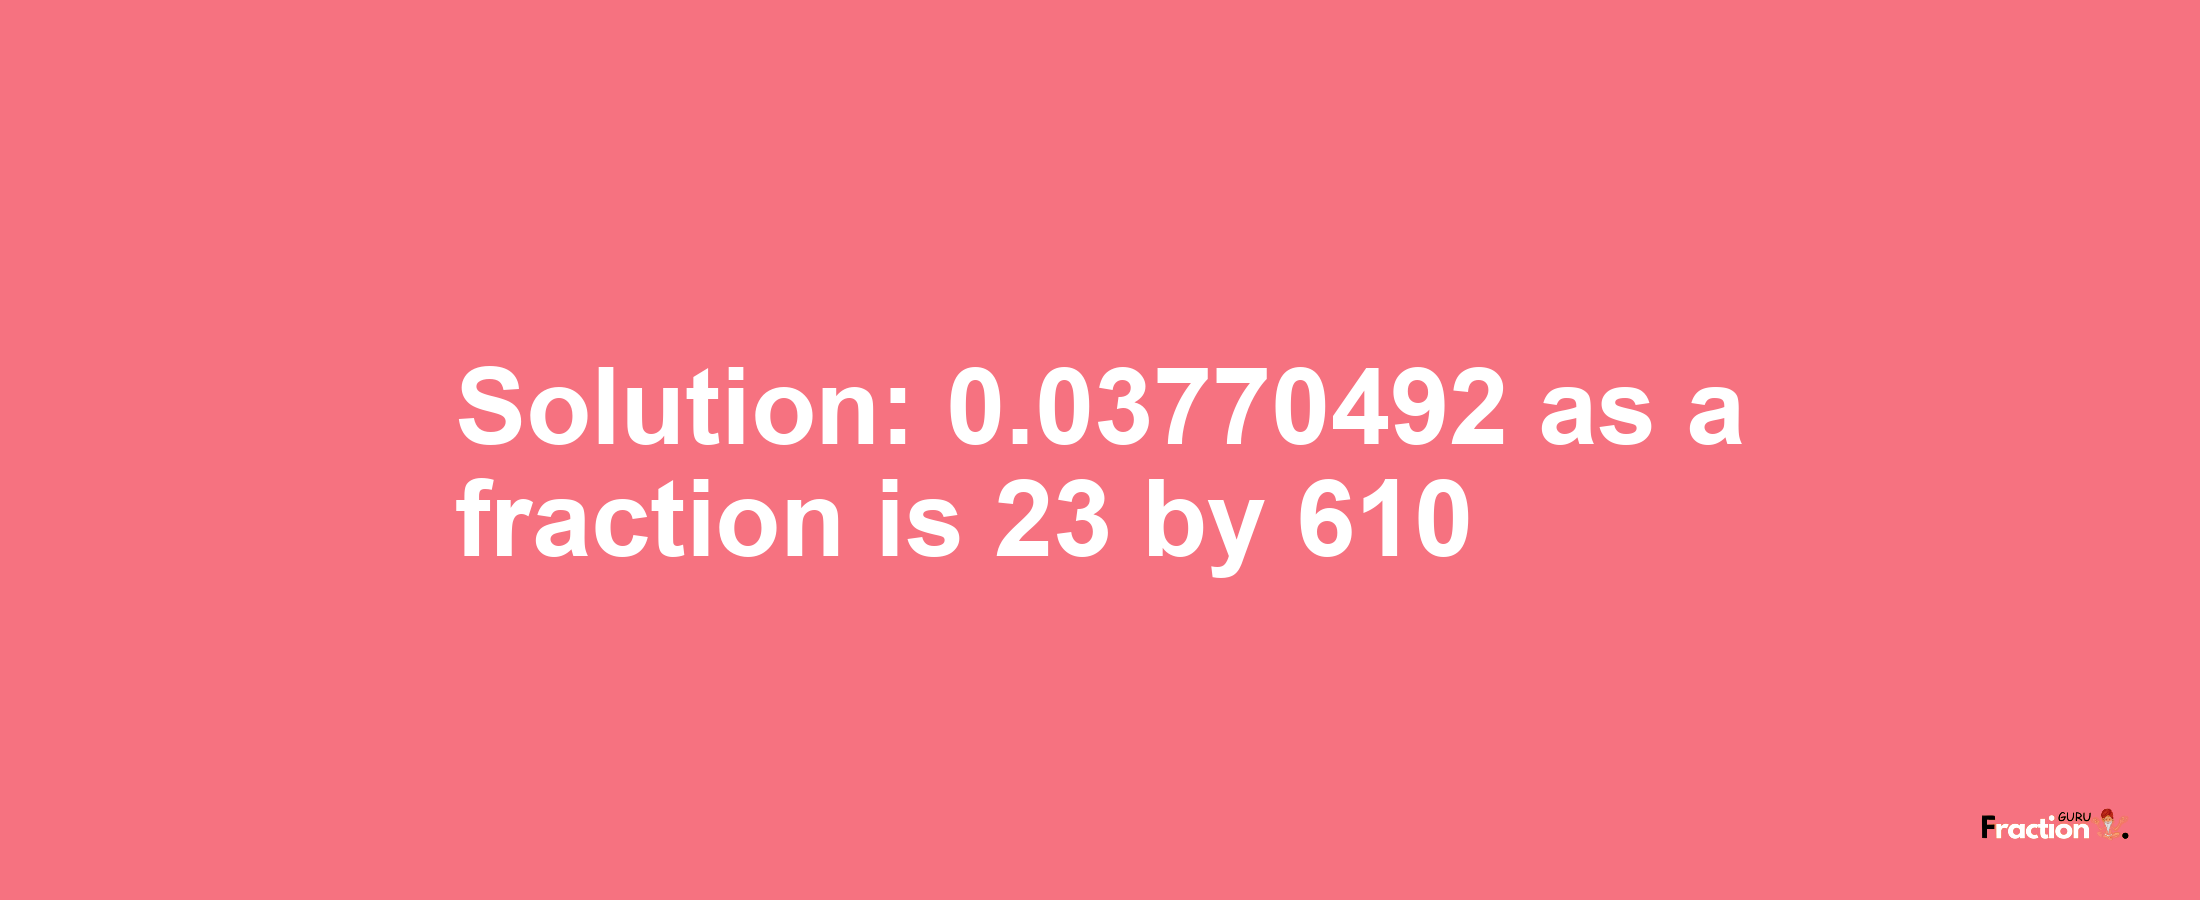 Solution:0.03770492 as a fraction is 23/610